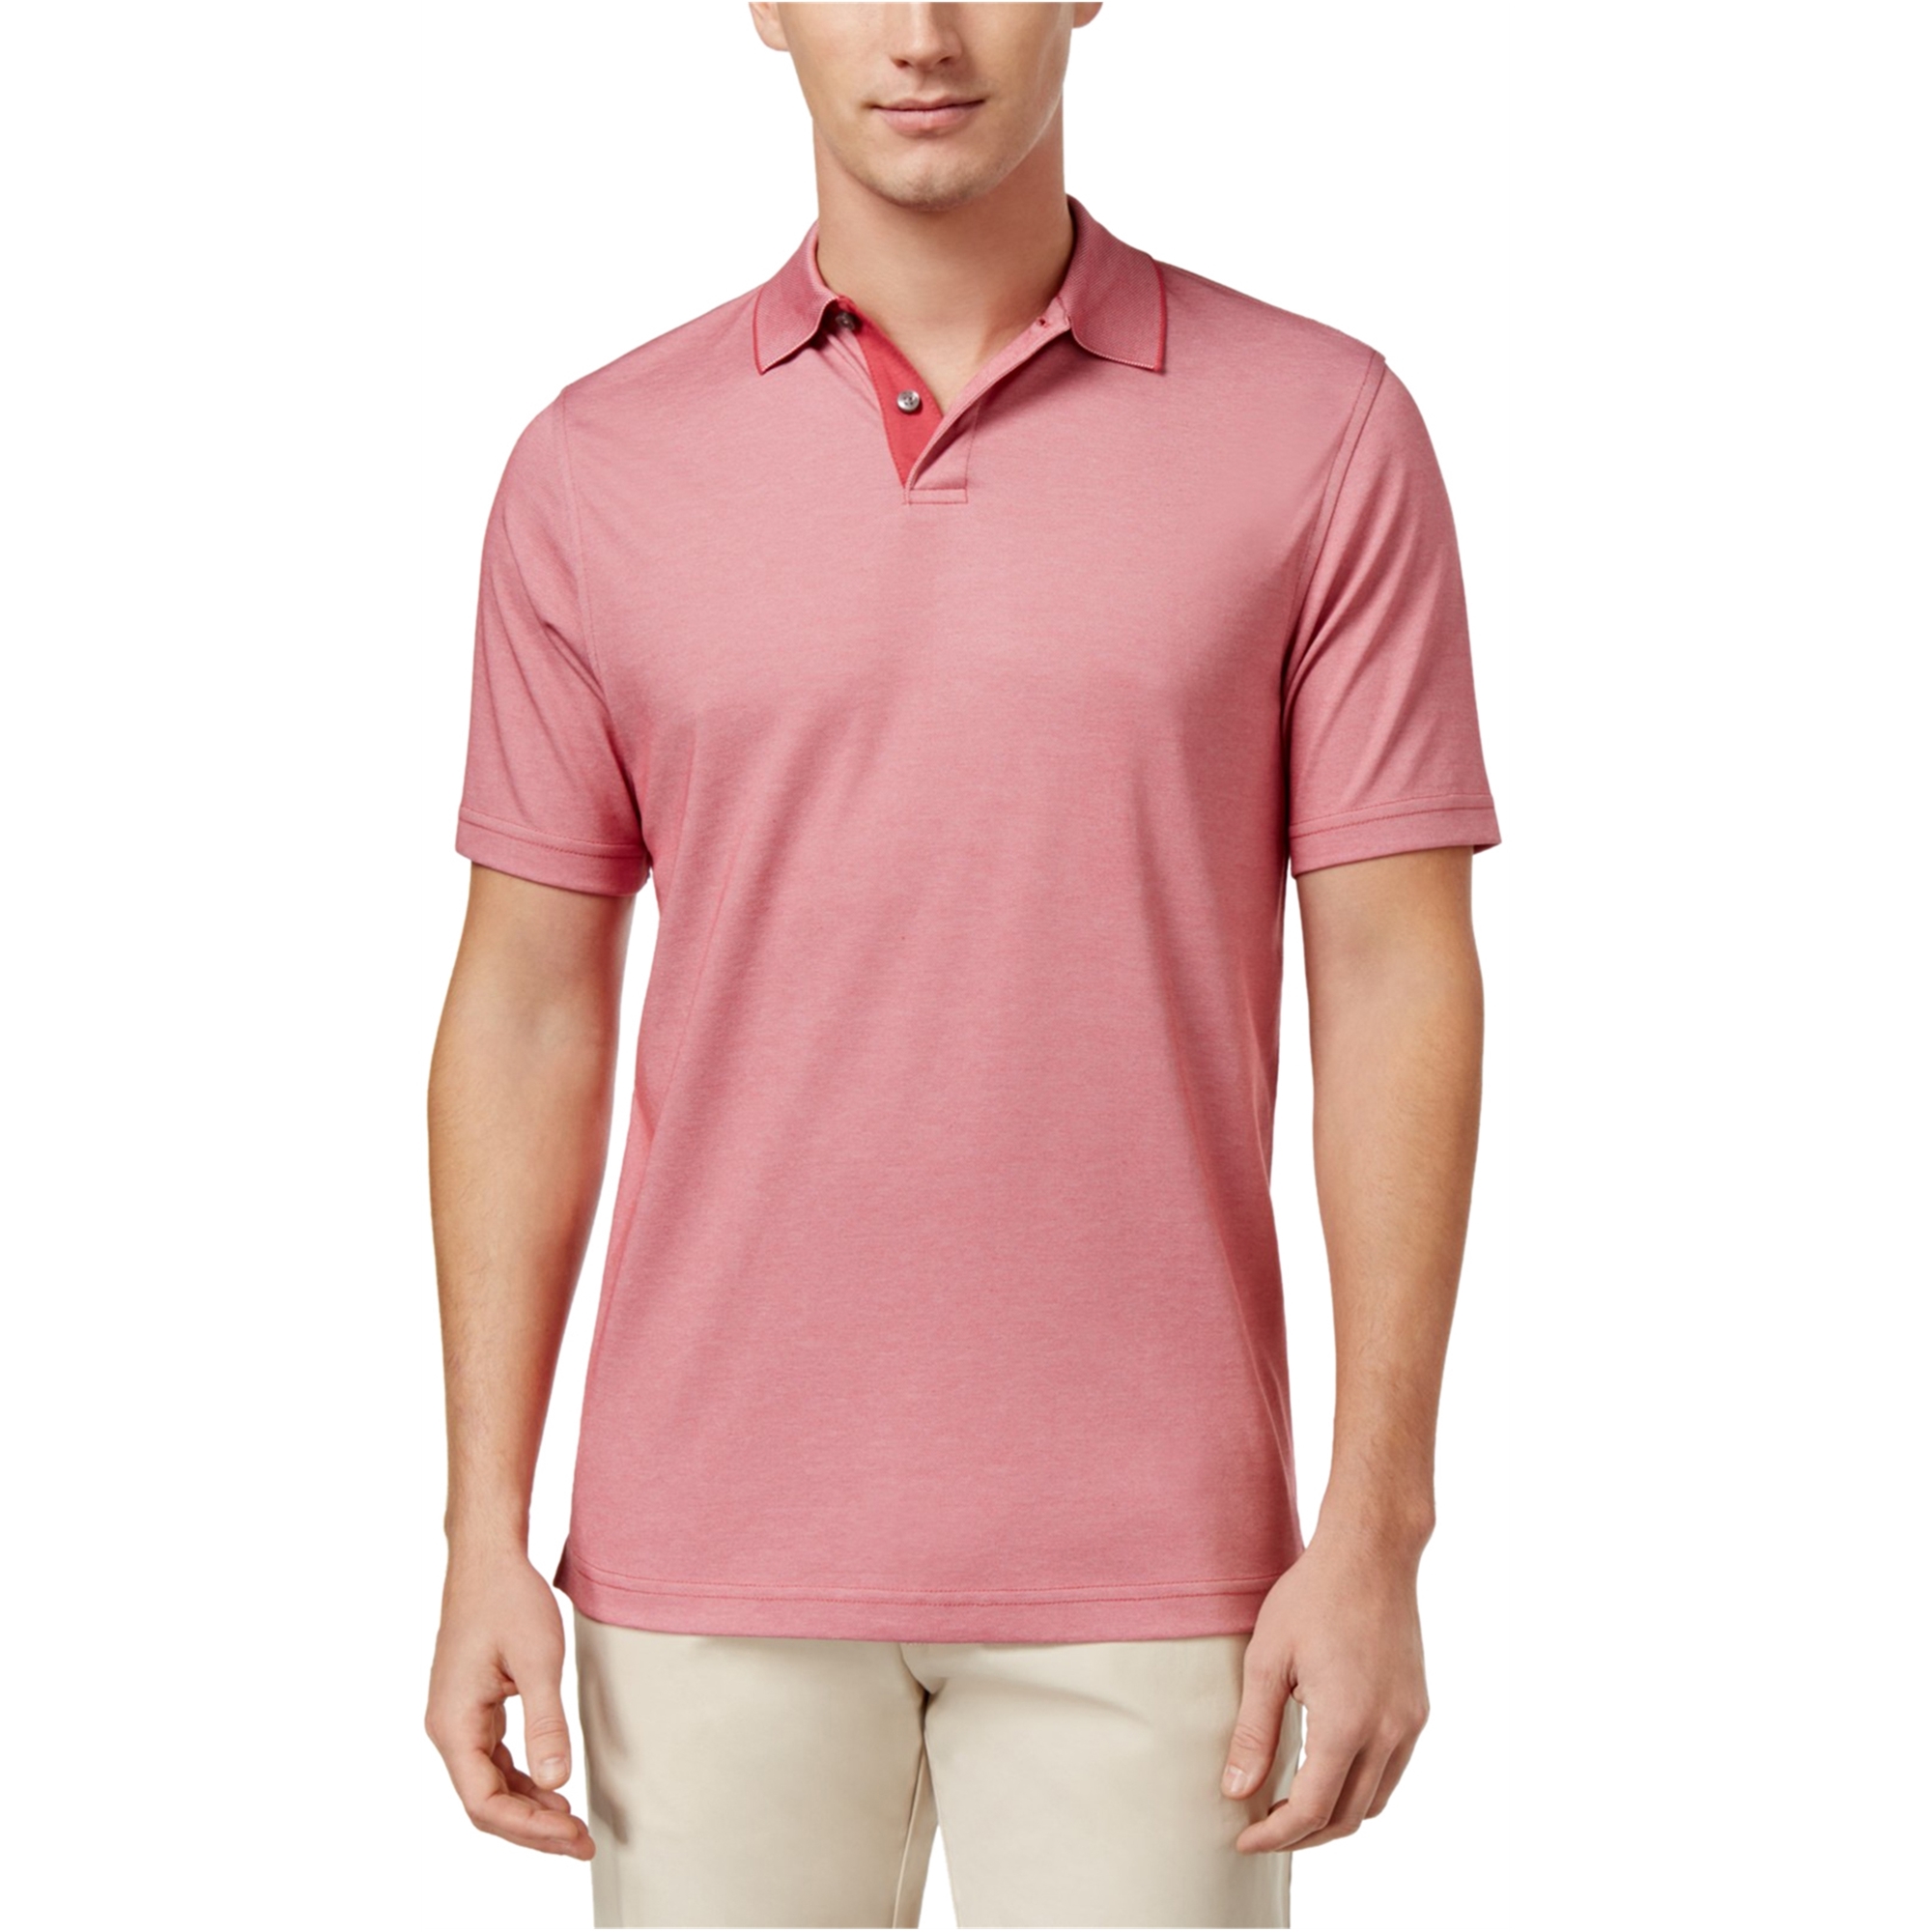 Download Mens Heather Short Sleeve Polo Shirt Front View ...